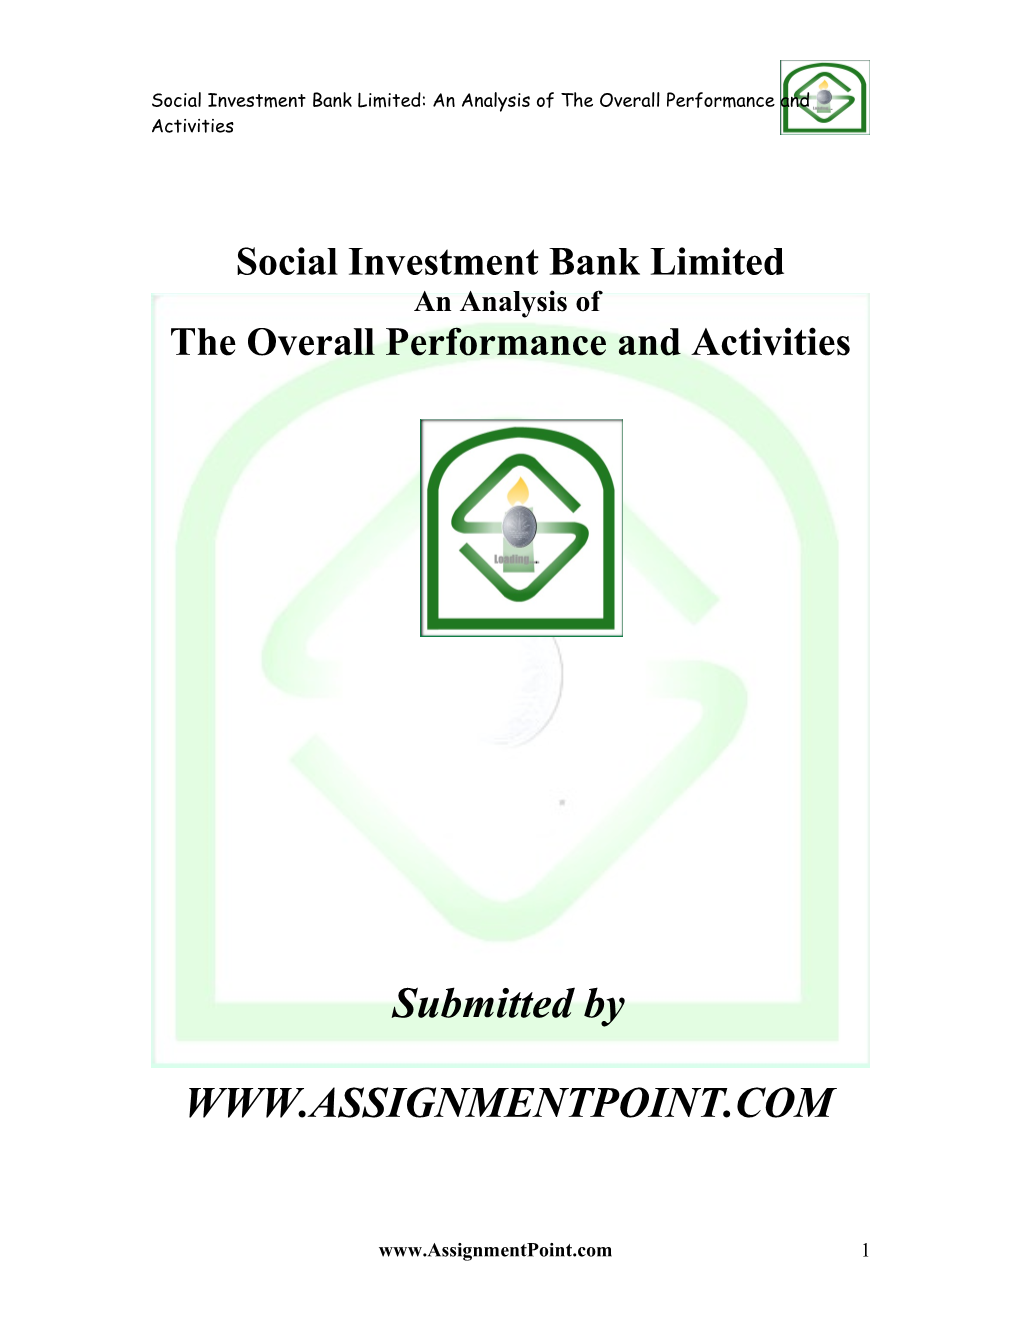 Social Investment Bank Limited: an Analysis of the Overall Performance and Activities